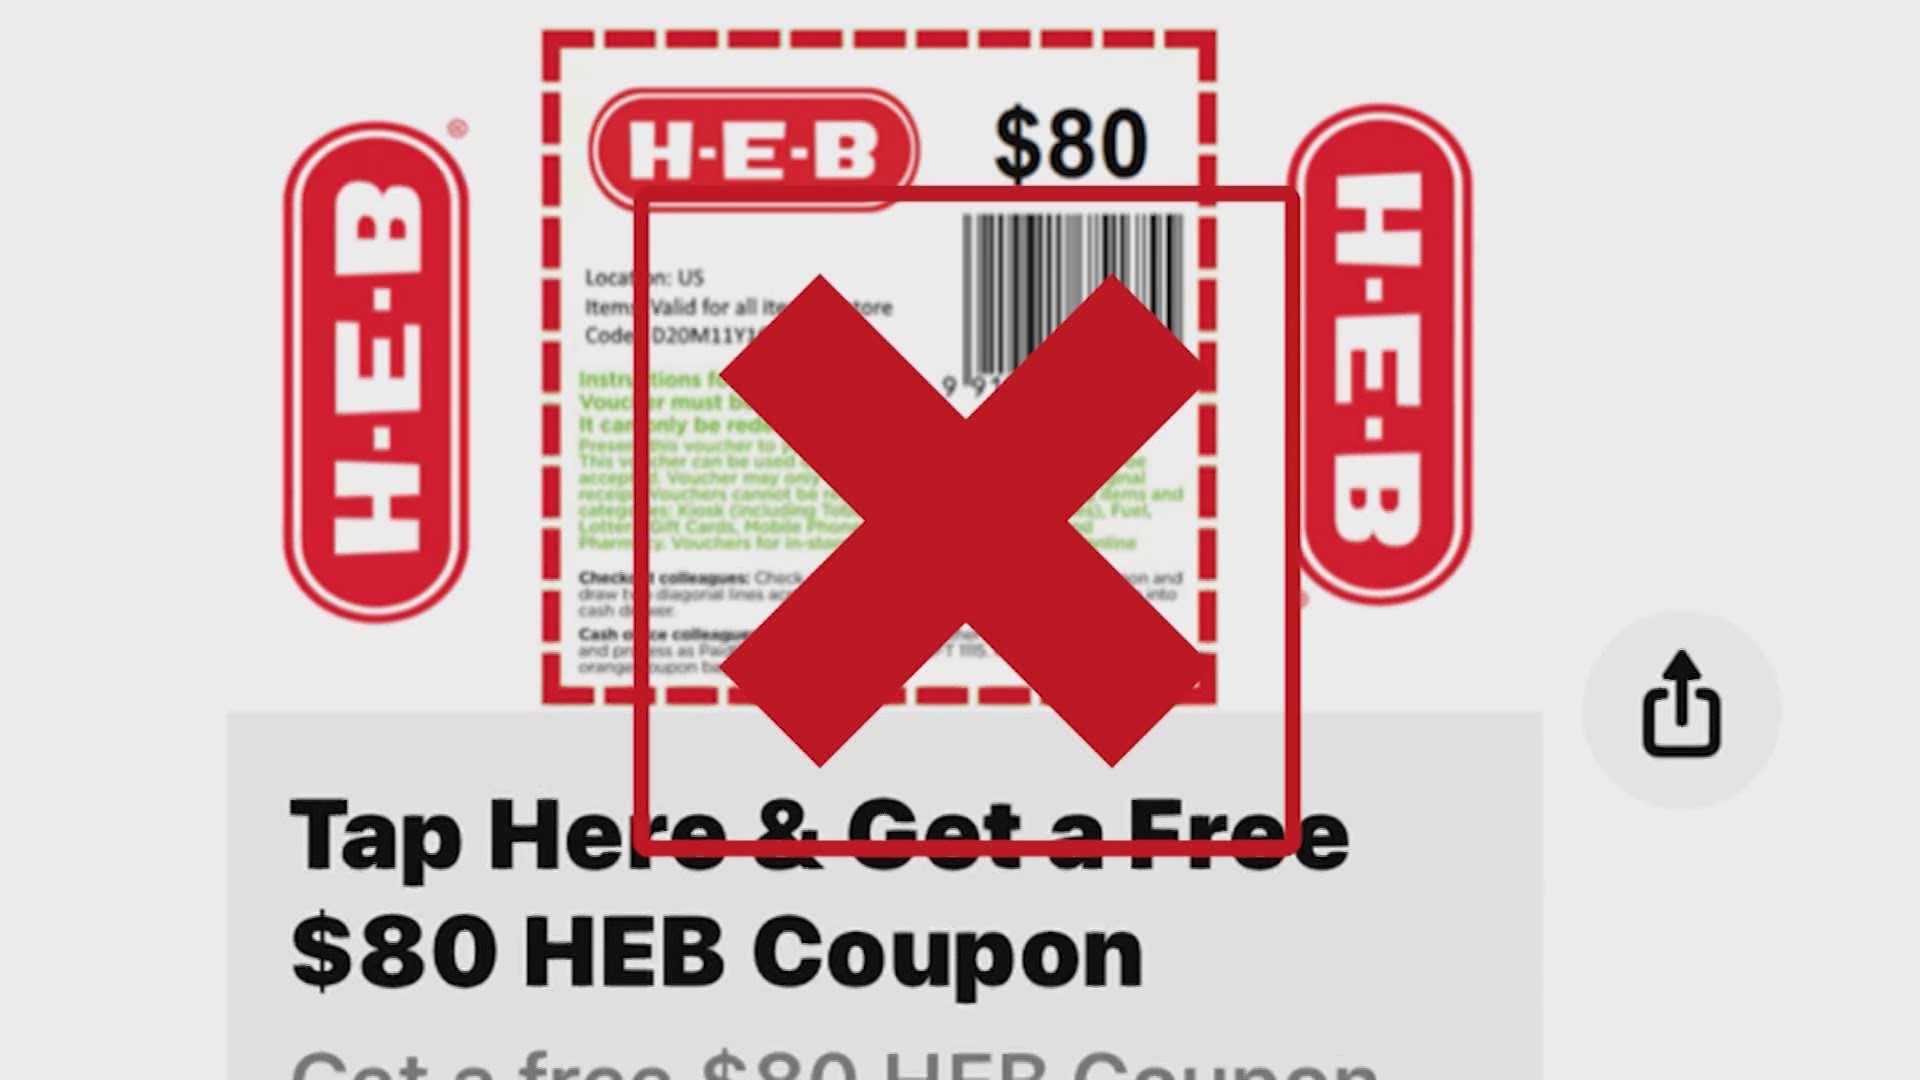 H-E-B, like most businesses, encourages its customers to head to their website to find legitimate offers.